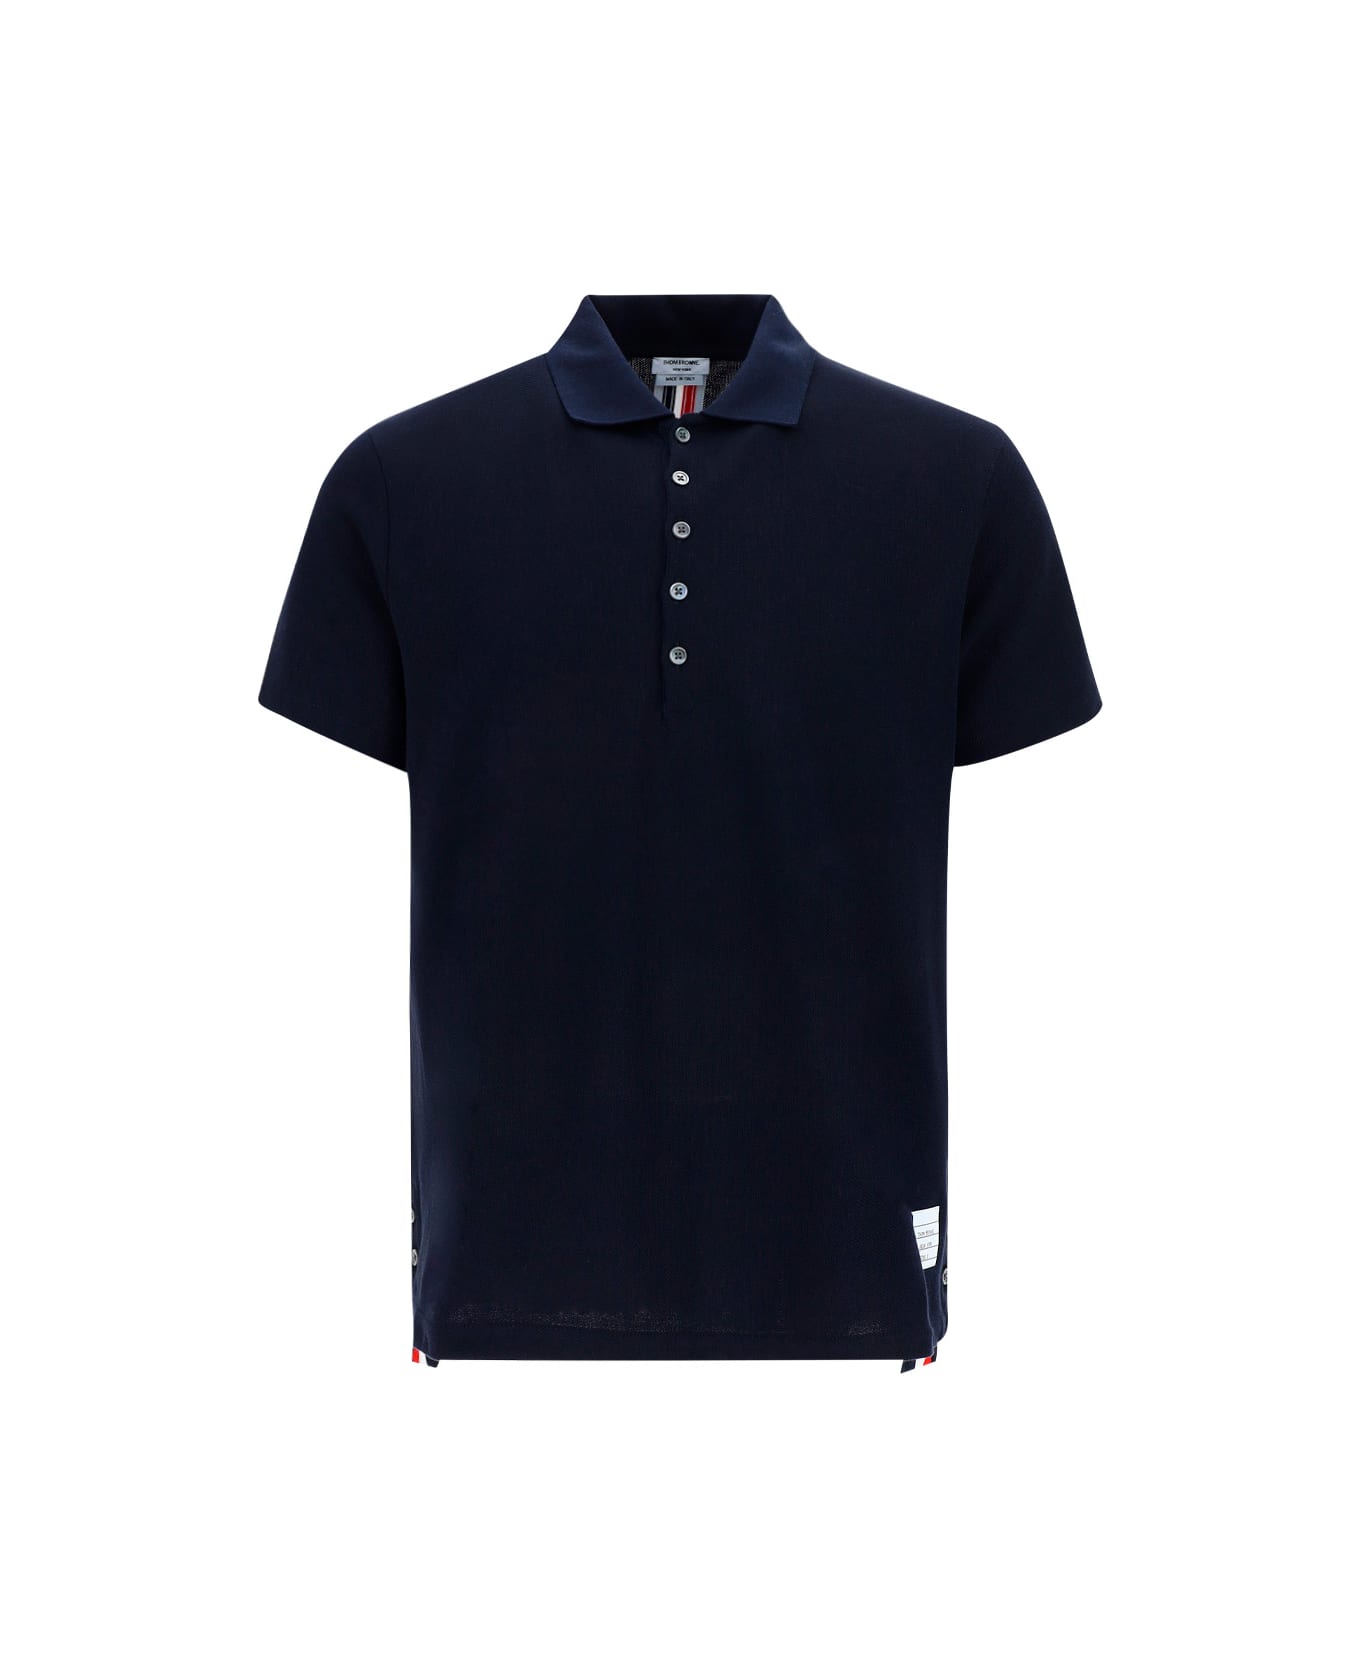 Thom Browne 'relaxed Fit Ss' Cotton Polo Shirt - BLUE